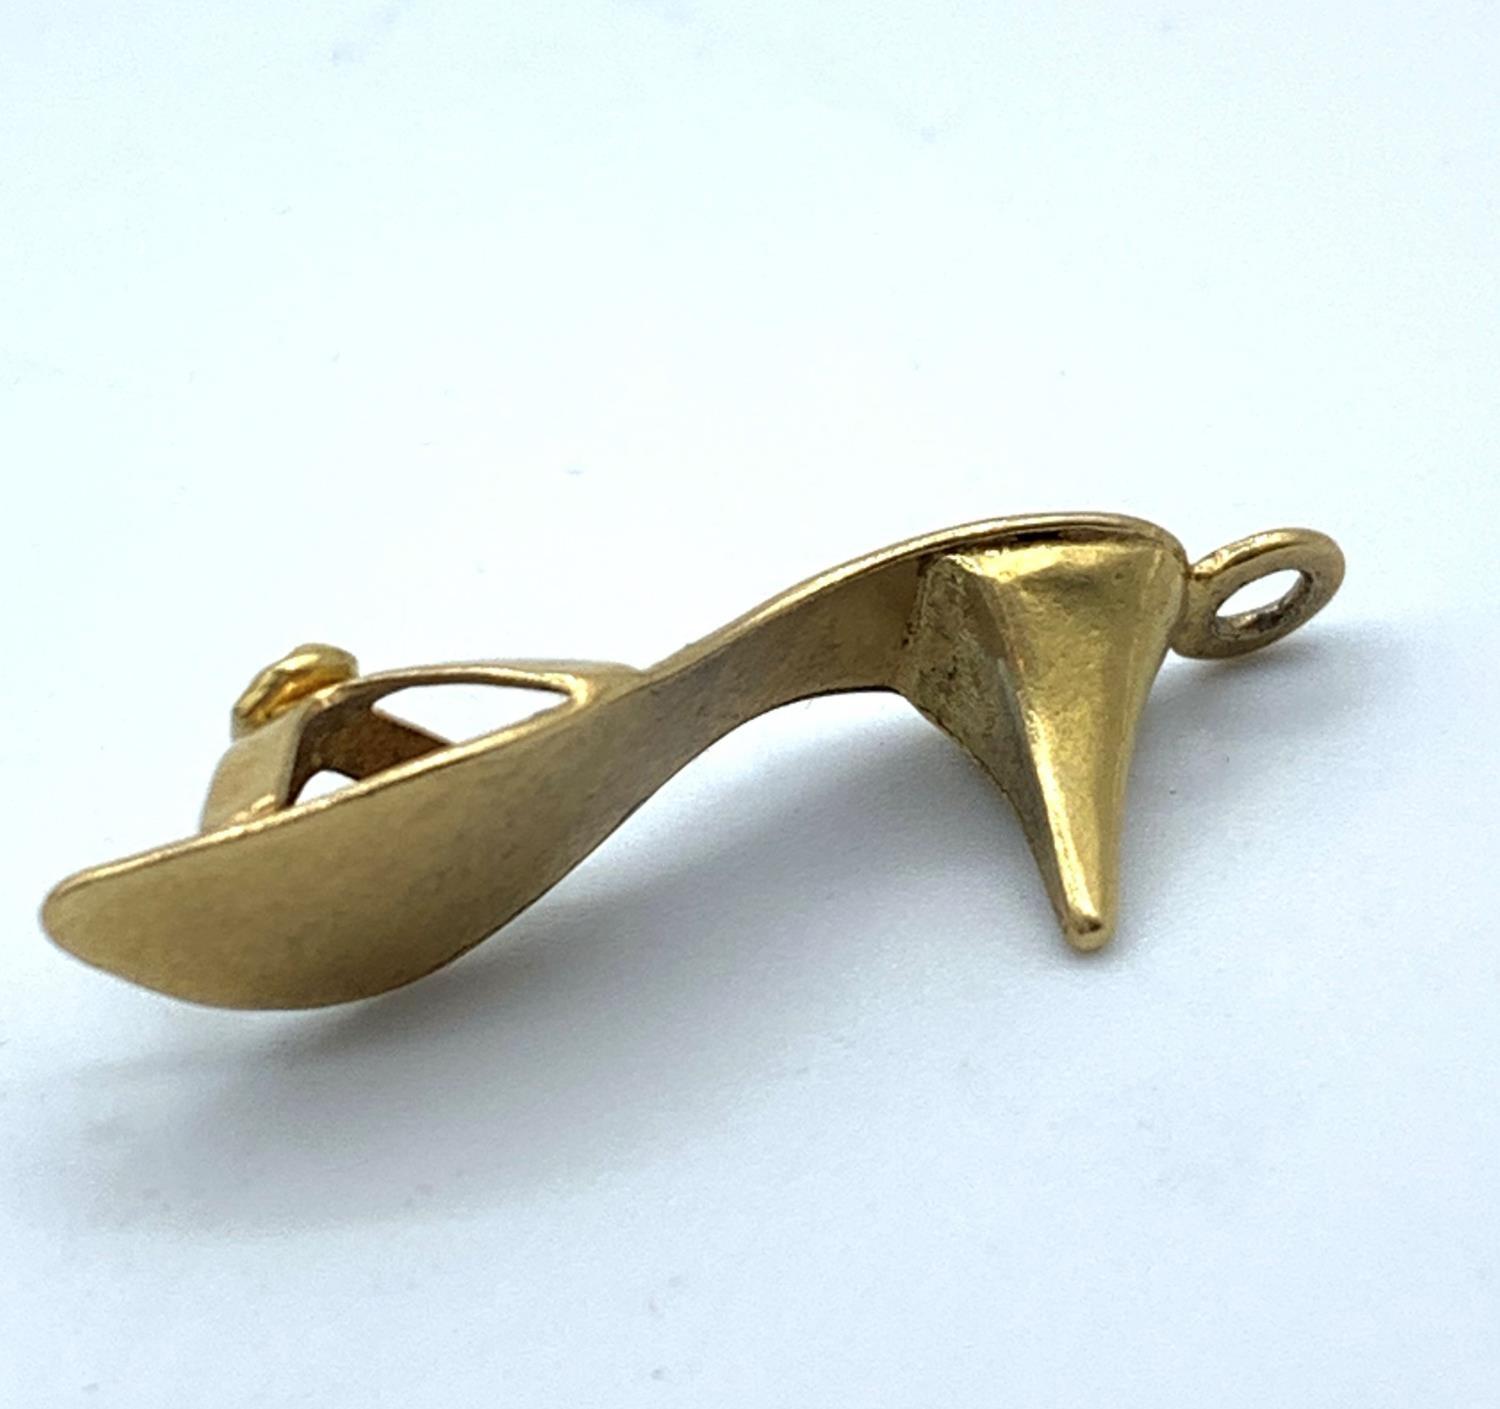 9ct Gold Shoe Charm/Pendant, weight 2.7g and 3cm long - Image 5 of 6